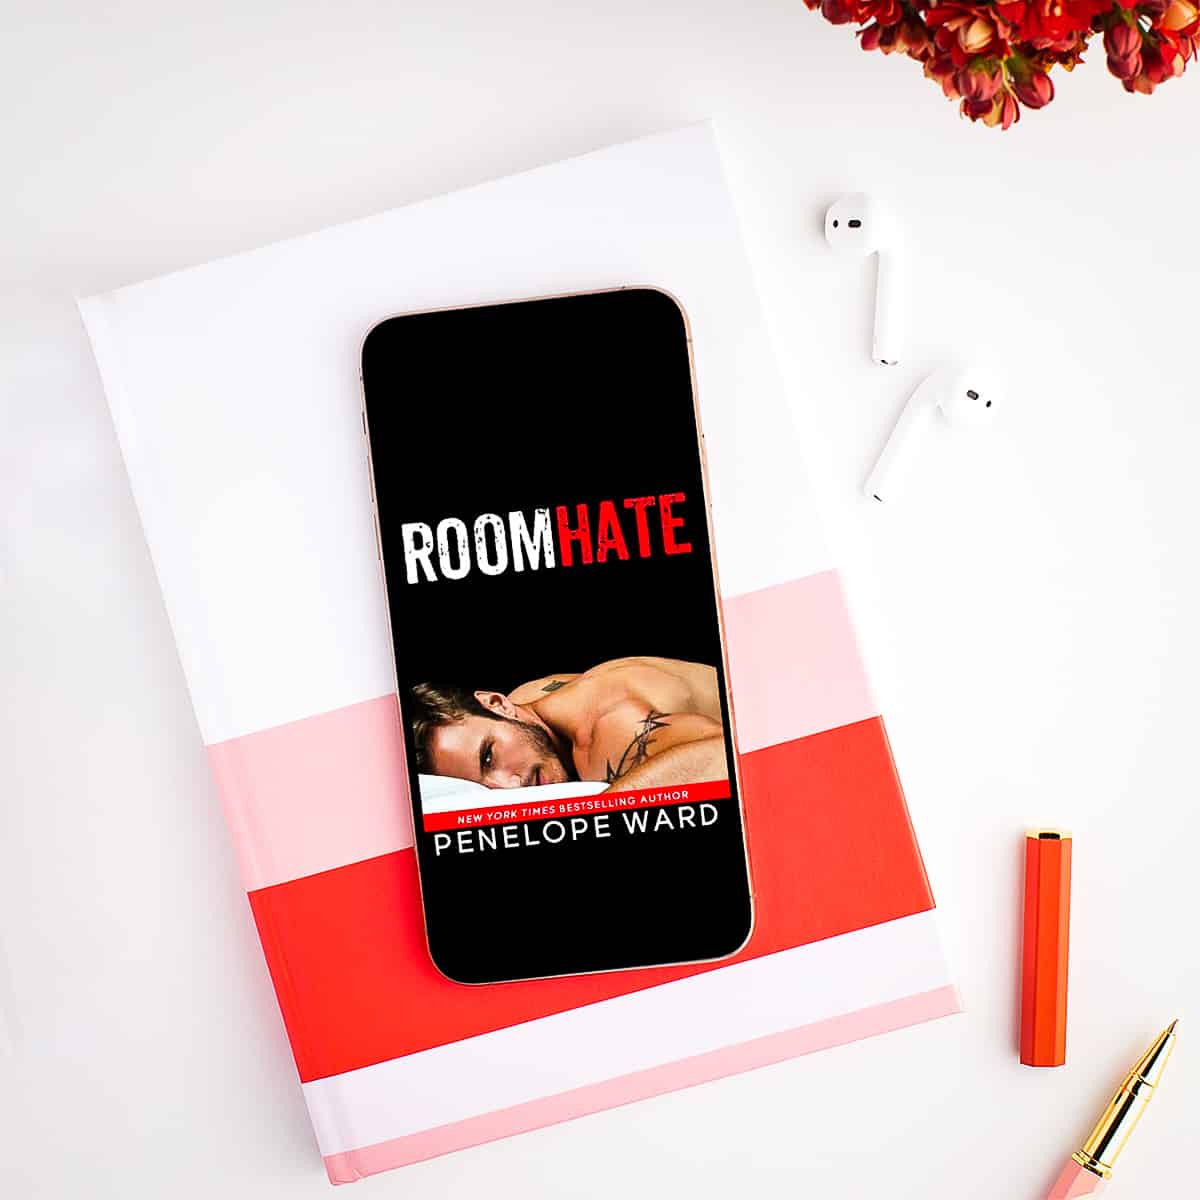 RoomHate by Penelope Ward is an angst-filled, second-chance forbidden romance that's a roller coaster of emotions, broken hearts, and first loves